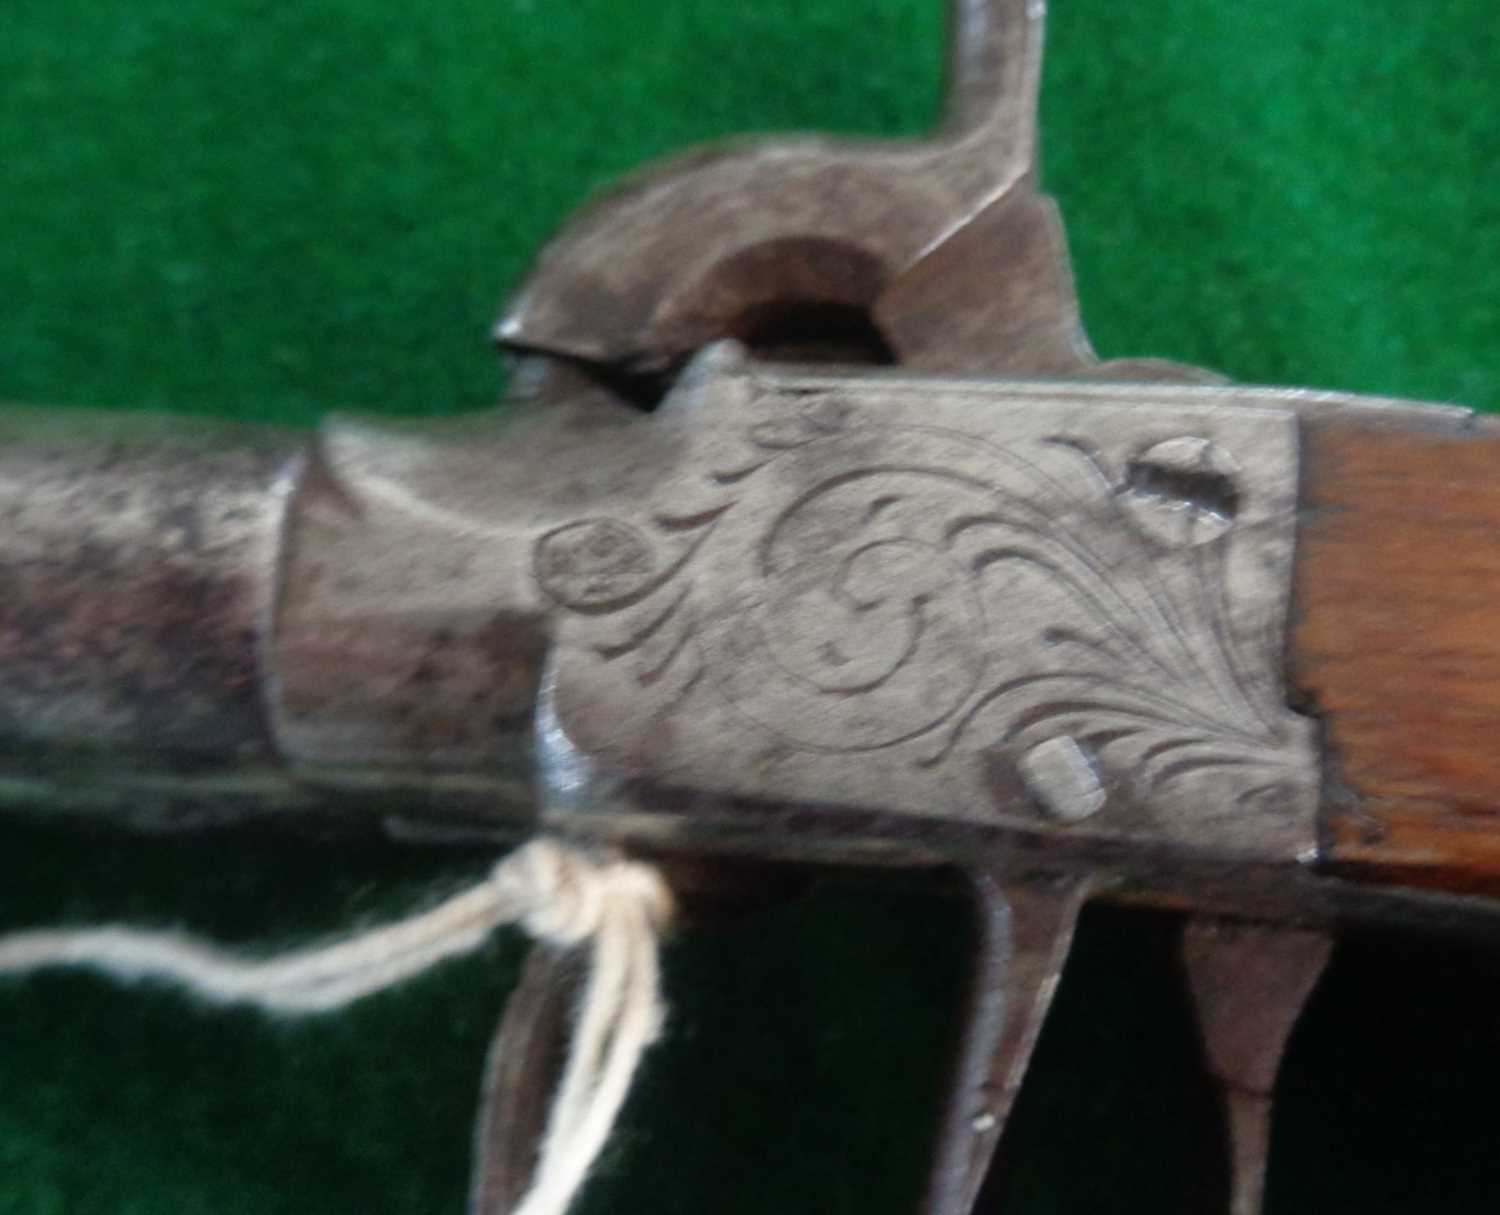 19th c double-barrelled percussion pistol, no apparent maker's marks, approx 18.5 cm long - Image 6 of 6